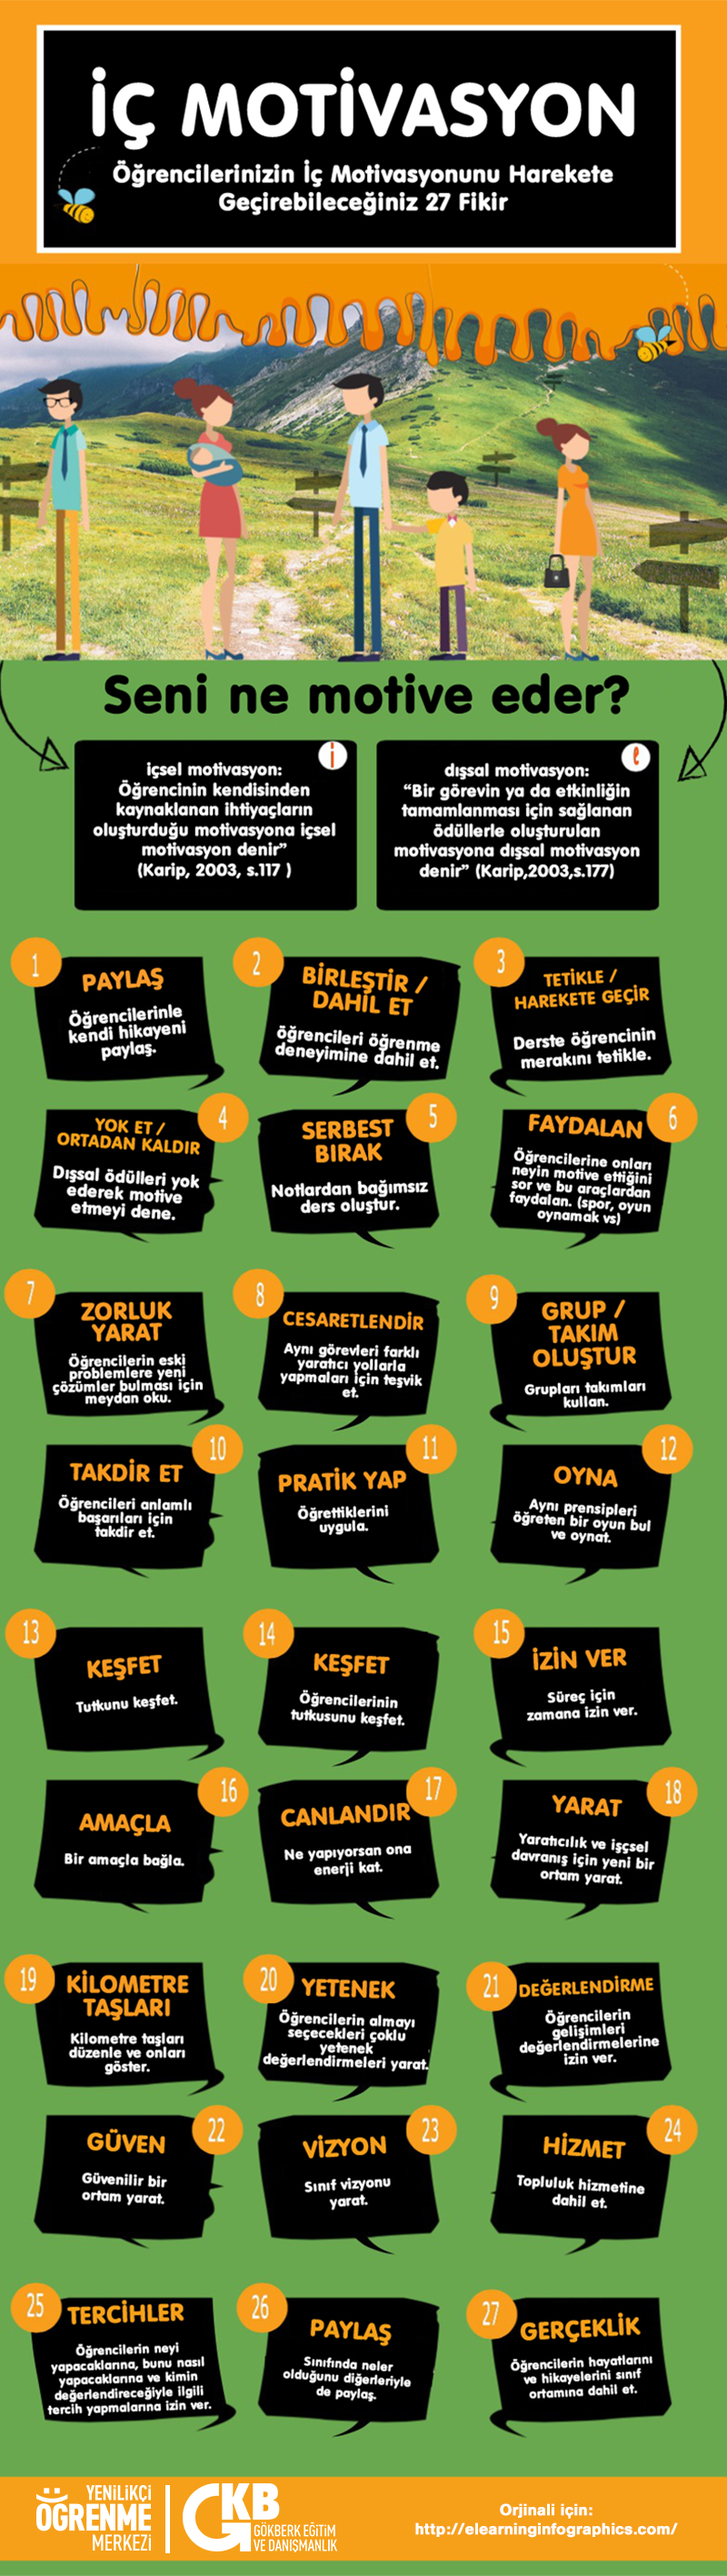 27-Ways-to-Encourage-Intrinsic-Motivation-in-Your-Students-Infographic